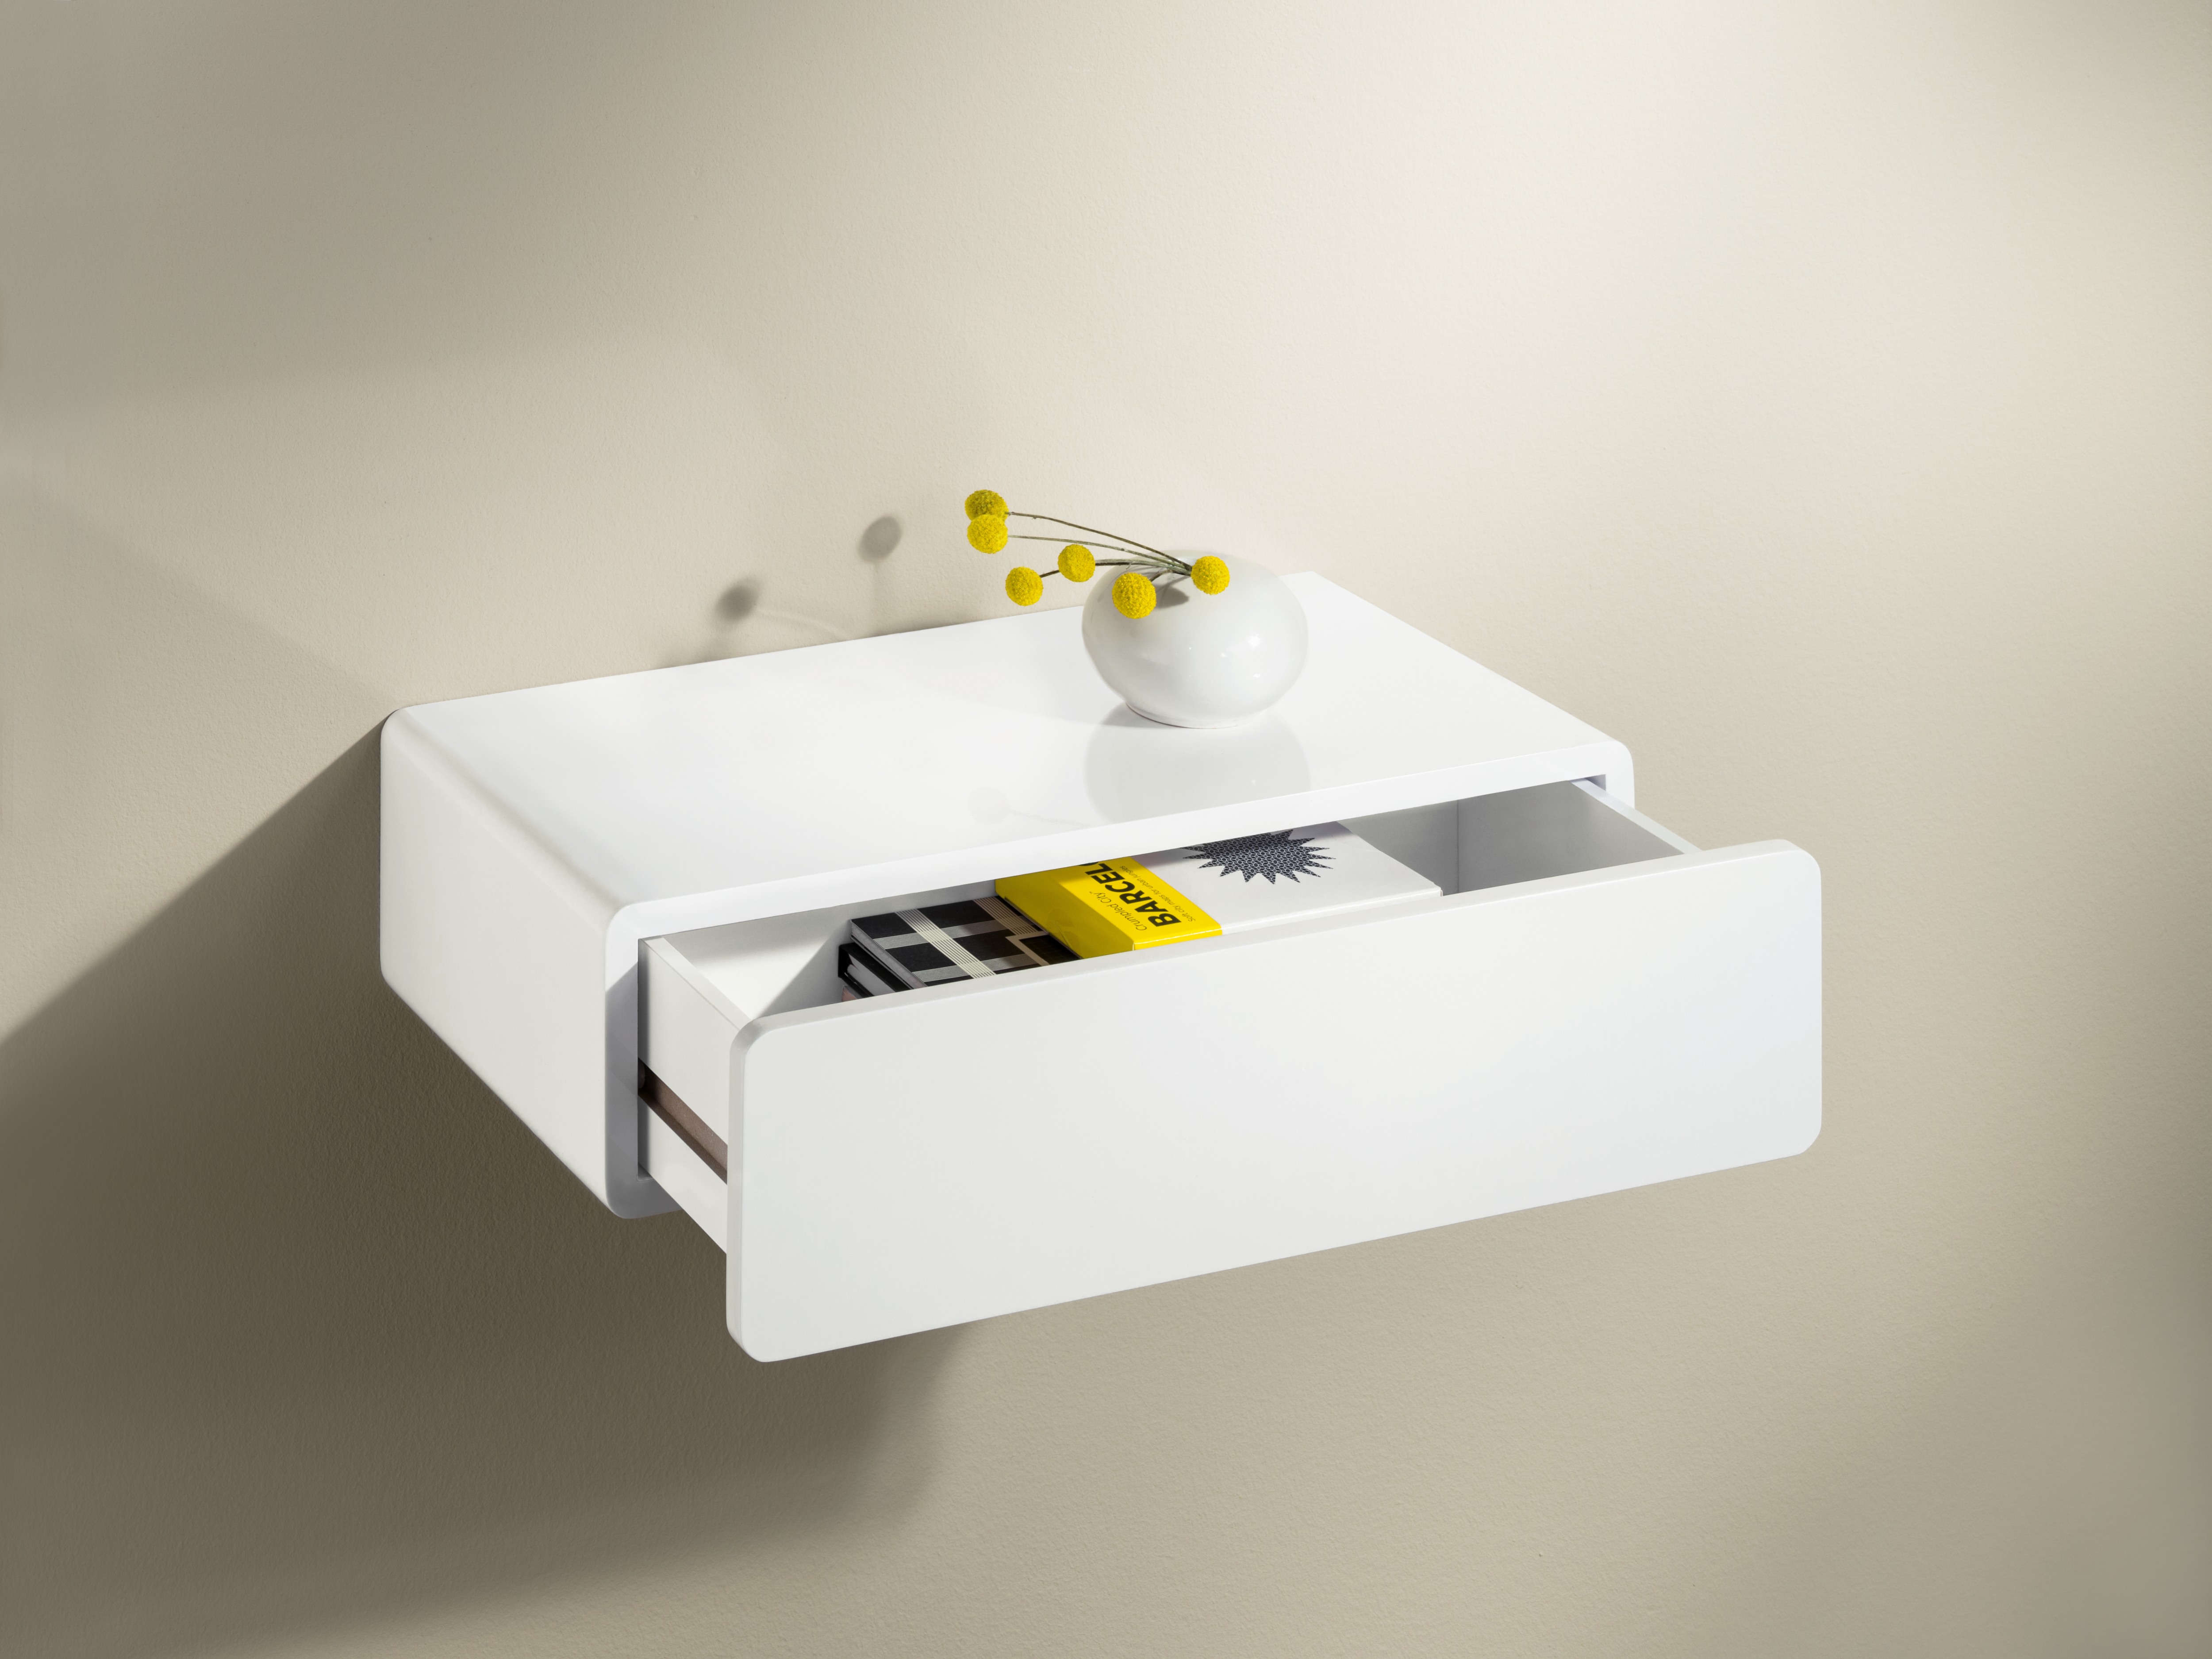 floating shelf with drawer the shelving cassy white lacquer kid can you put underlay under vinyl tactical safe french cleat storage ideas for cable box bike shower bracket inch